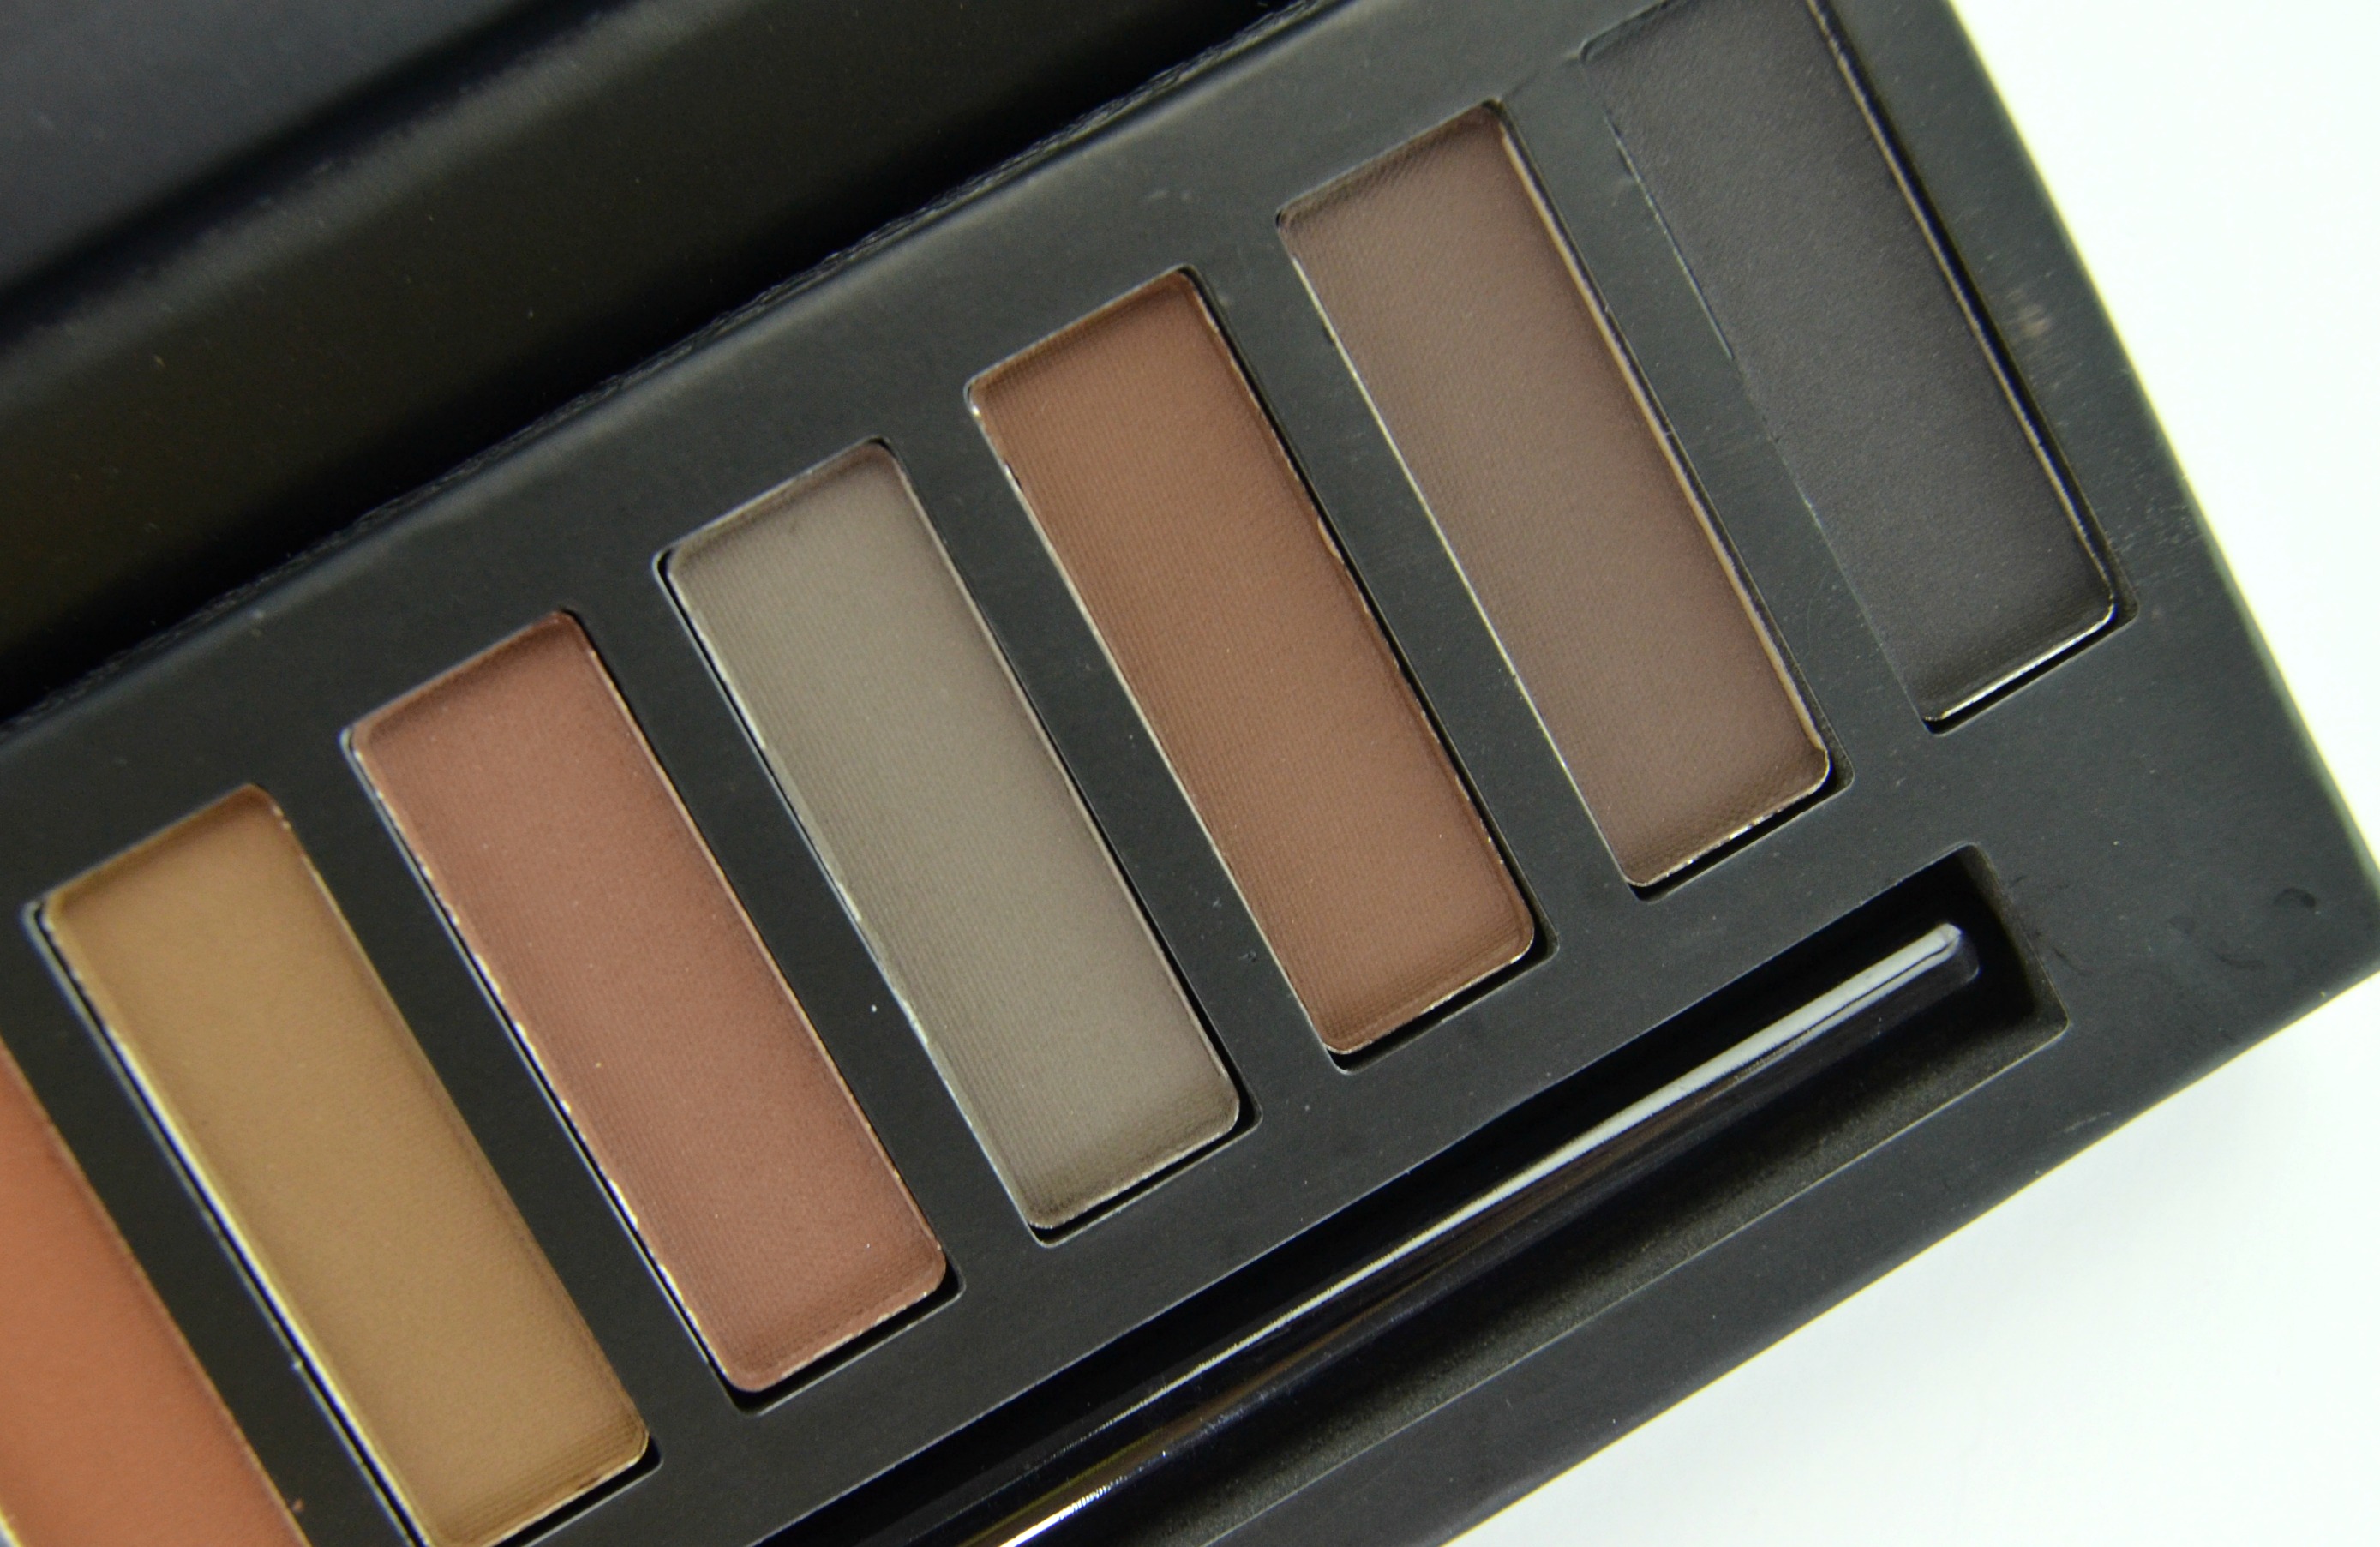 Paula's Choice The Nude Mattes Eyeshadow Palette - wide 1